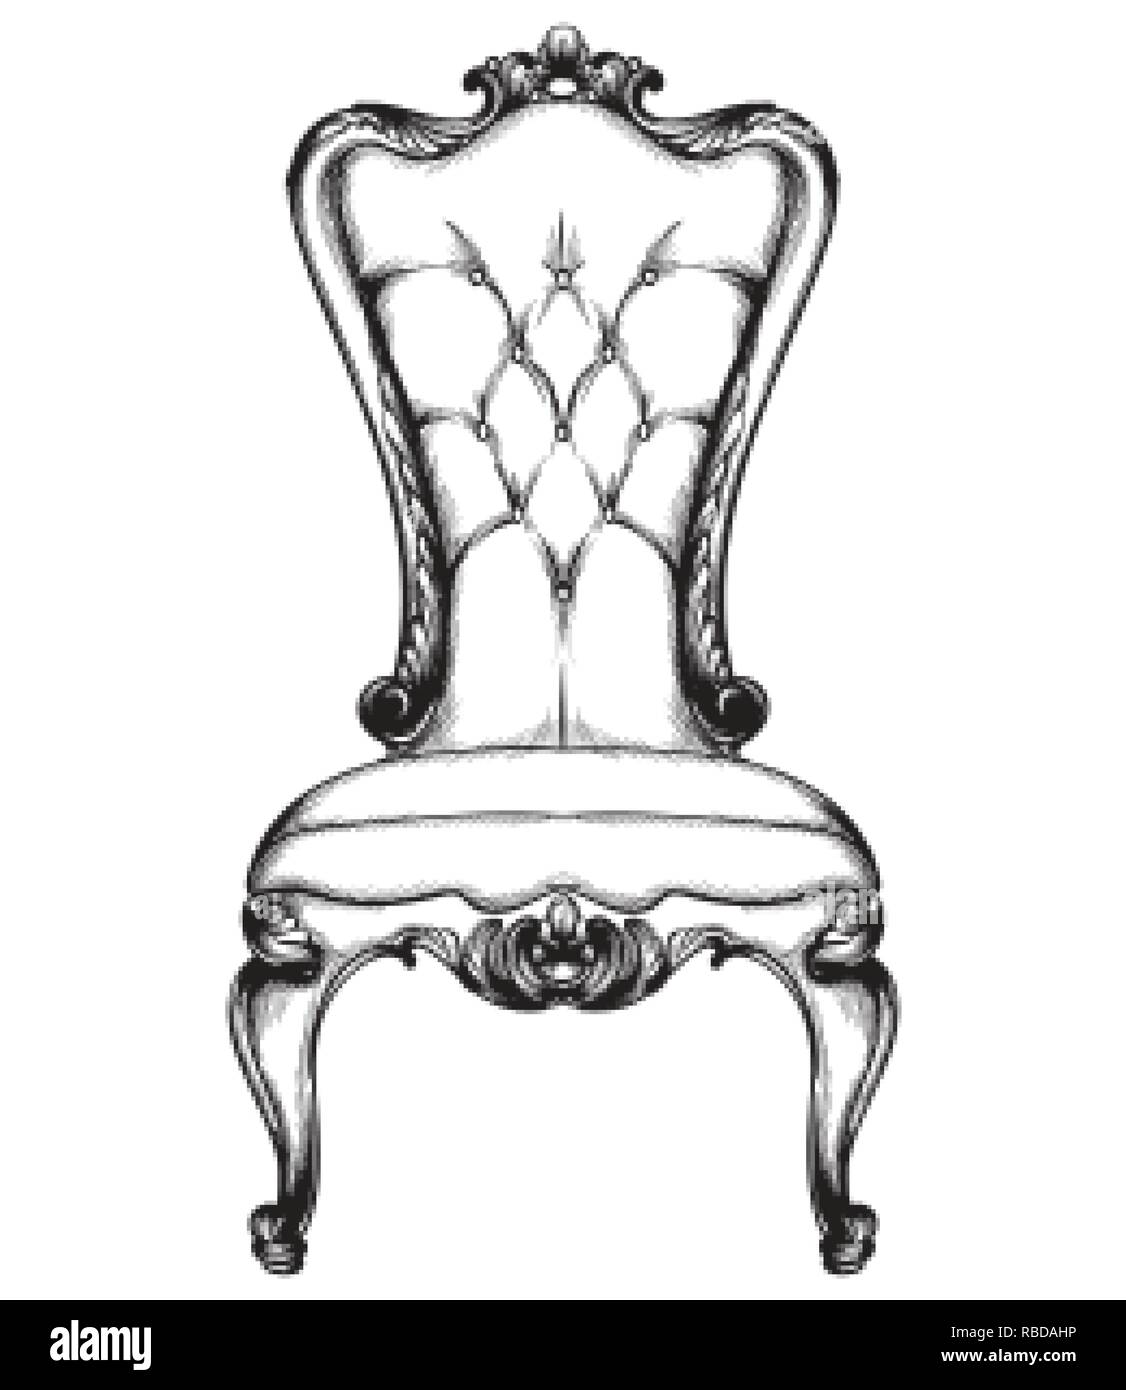 Fabulous Rich Baroque Rococo Chair French Stock Vector (Royalty Free)  452211715 | Shutterstock